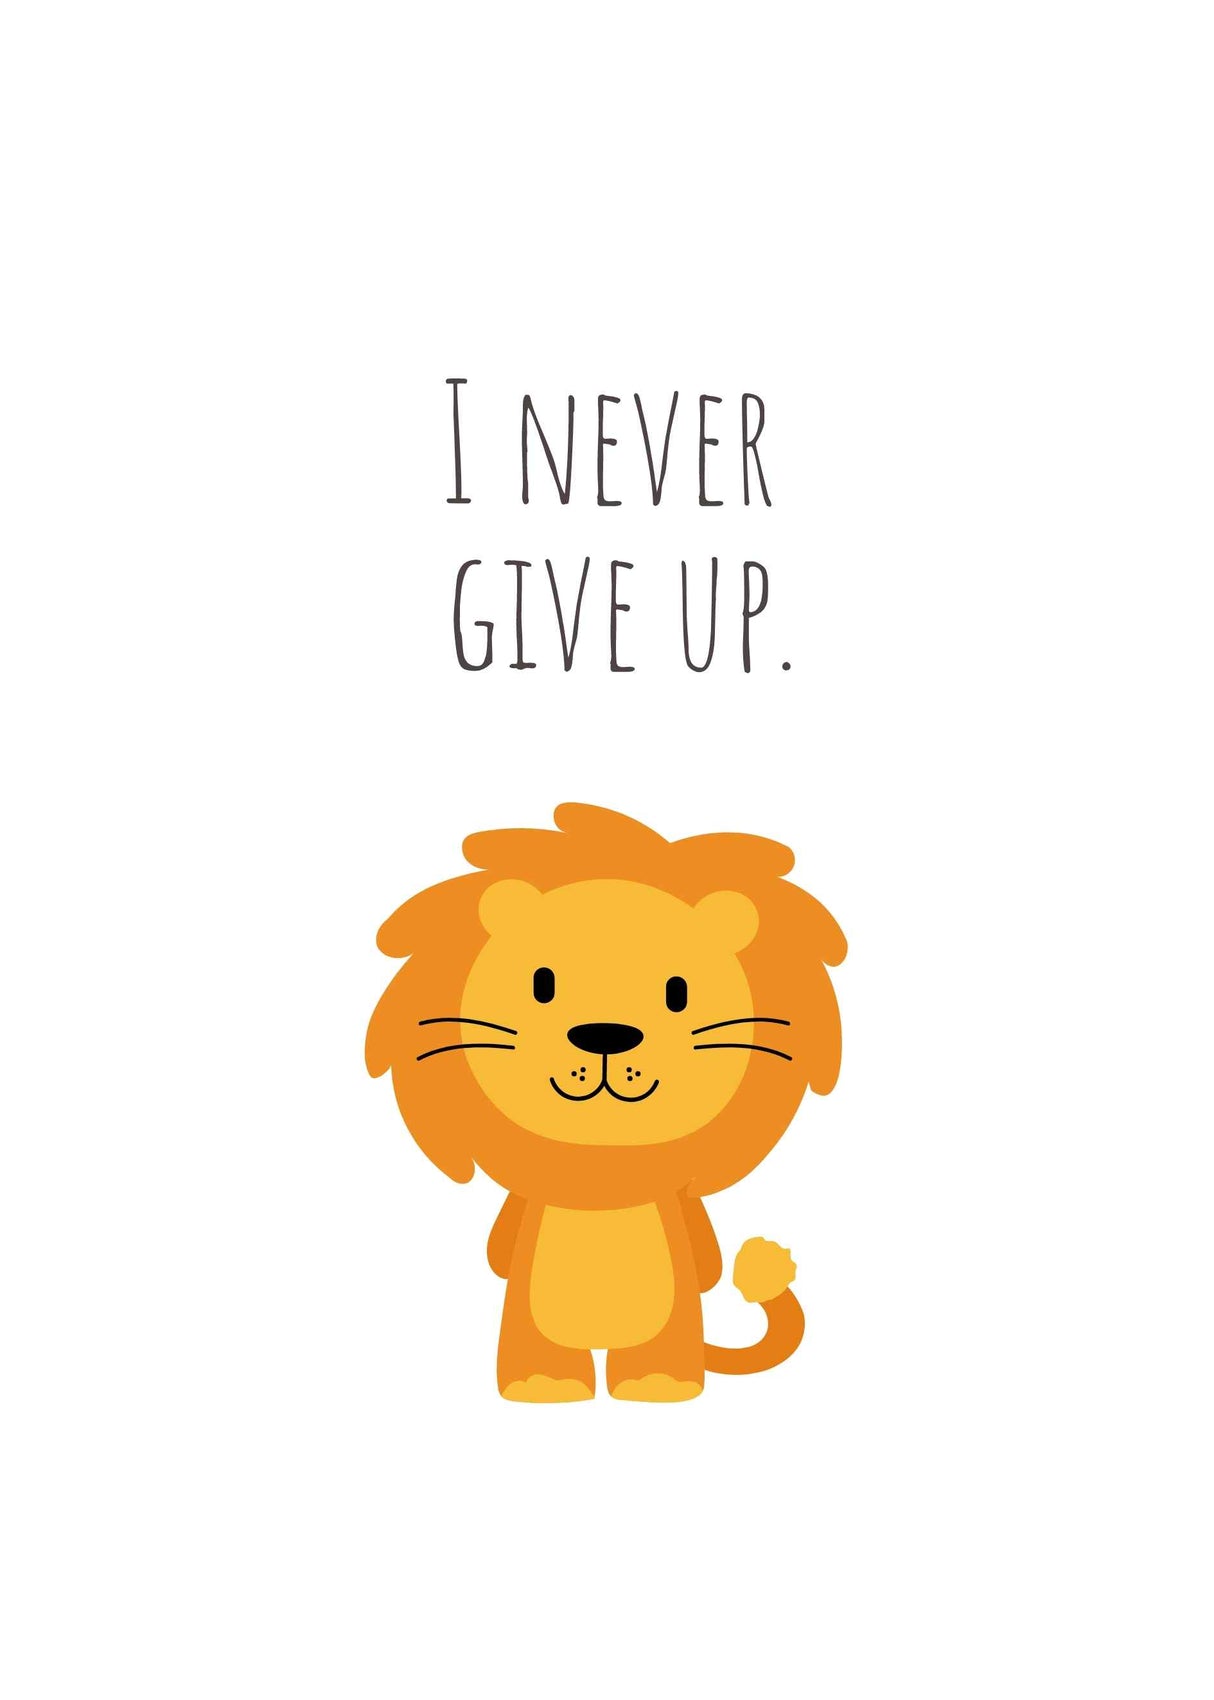 I NEVER GIVE UP barnposter